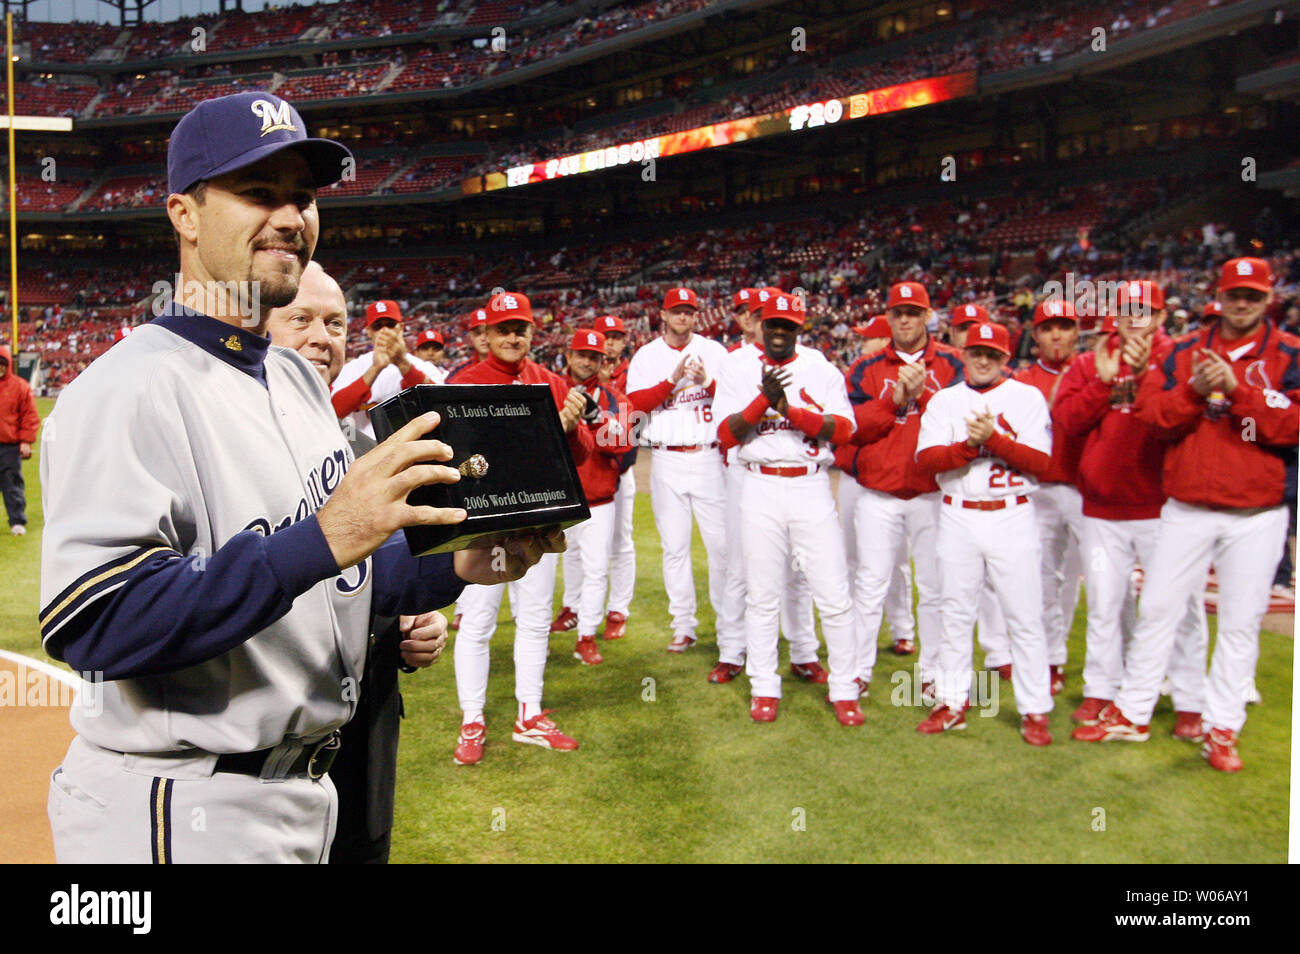 Milwaukee Brewers pitcher Jeff Suppan shows off his World Series  Championship ring as his former St. Louis Cardinals teammates clap during  ceremonies in St. Louis on April 13, 2007. Suppan left the